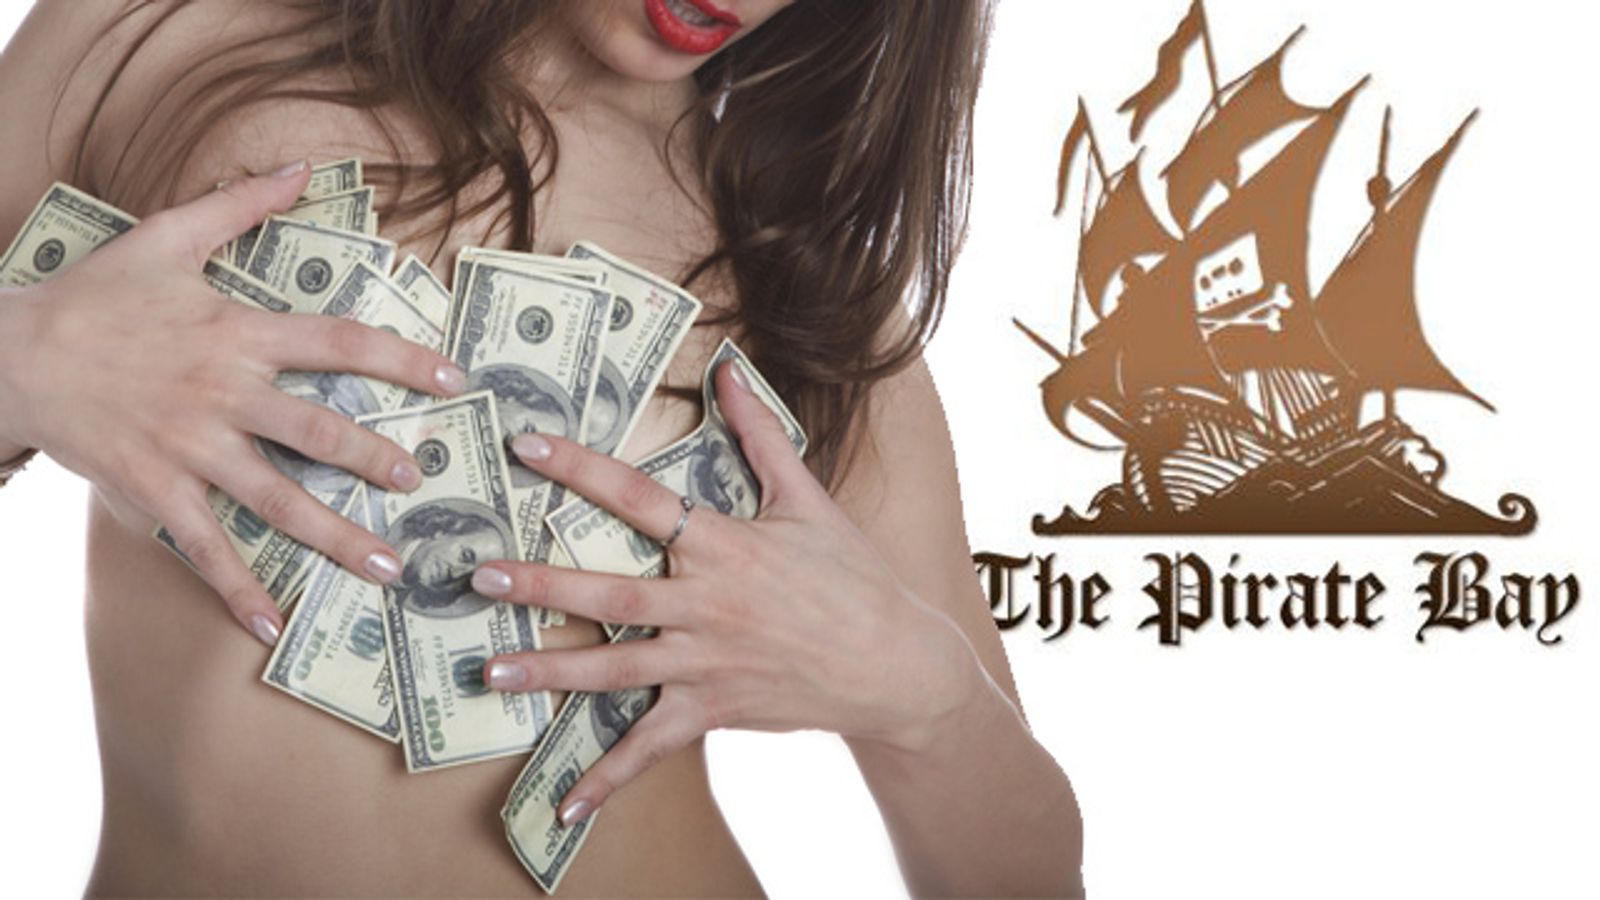 Pirate Bay Sale Nears Completion